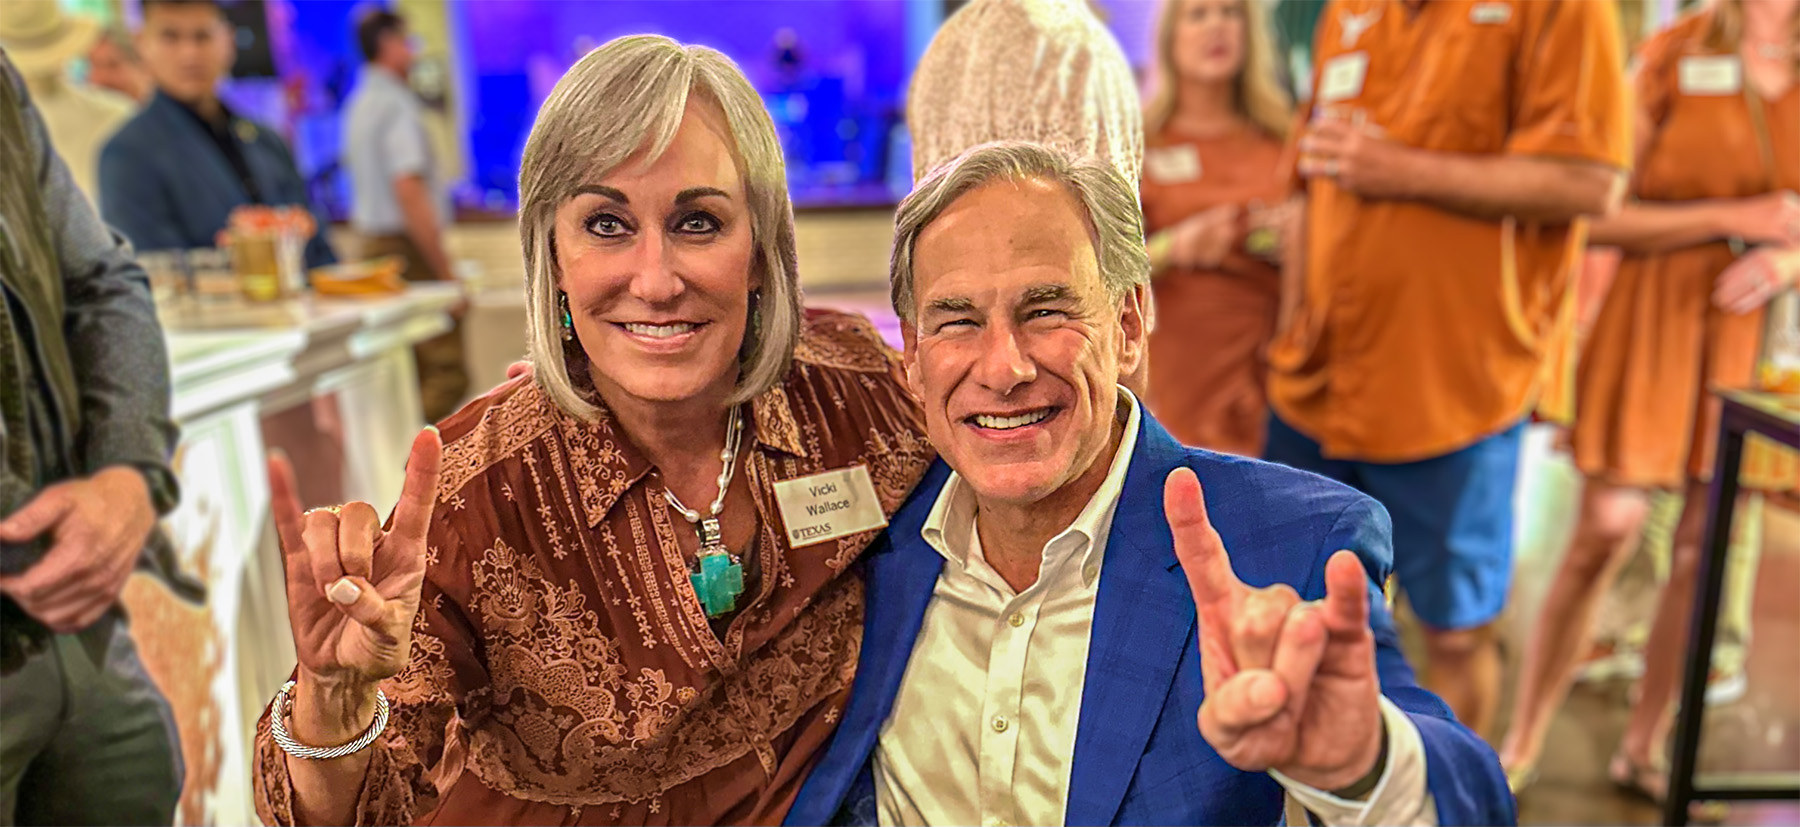 Vicki Wallace with Texas Governor Greg Abbott.